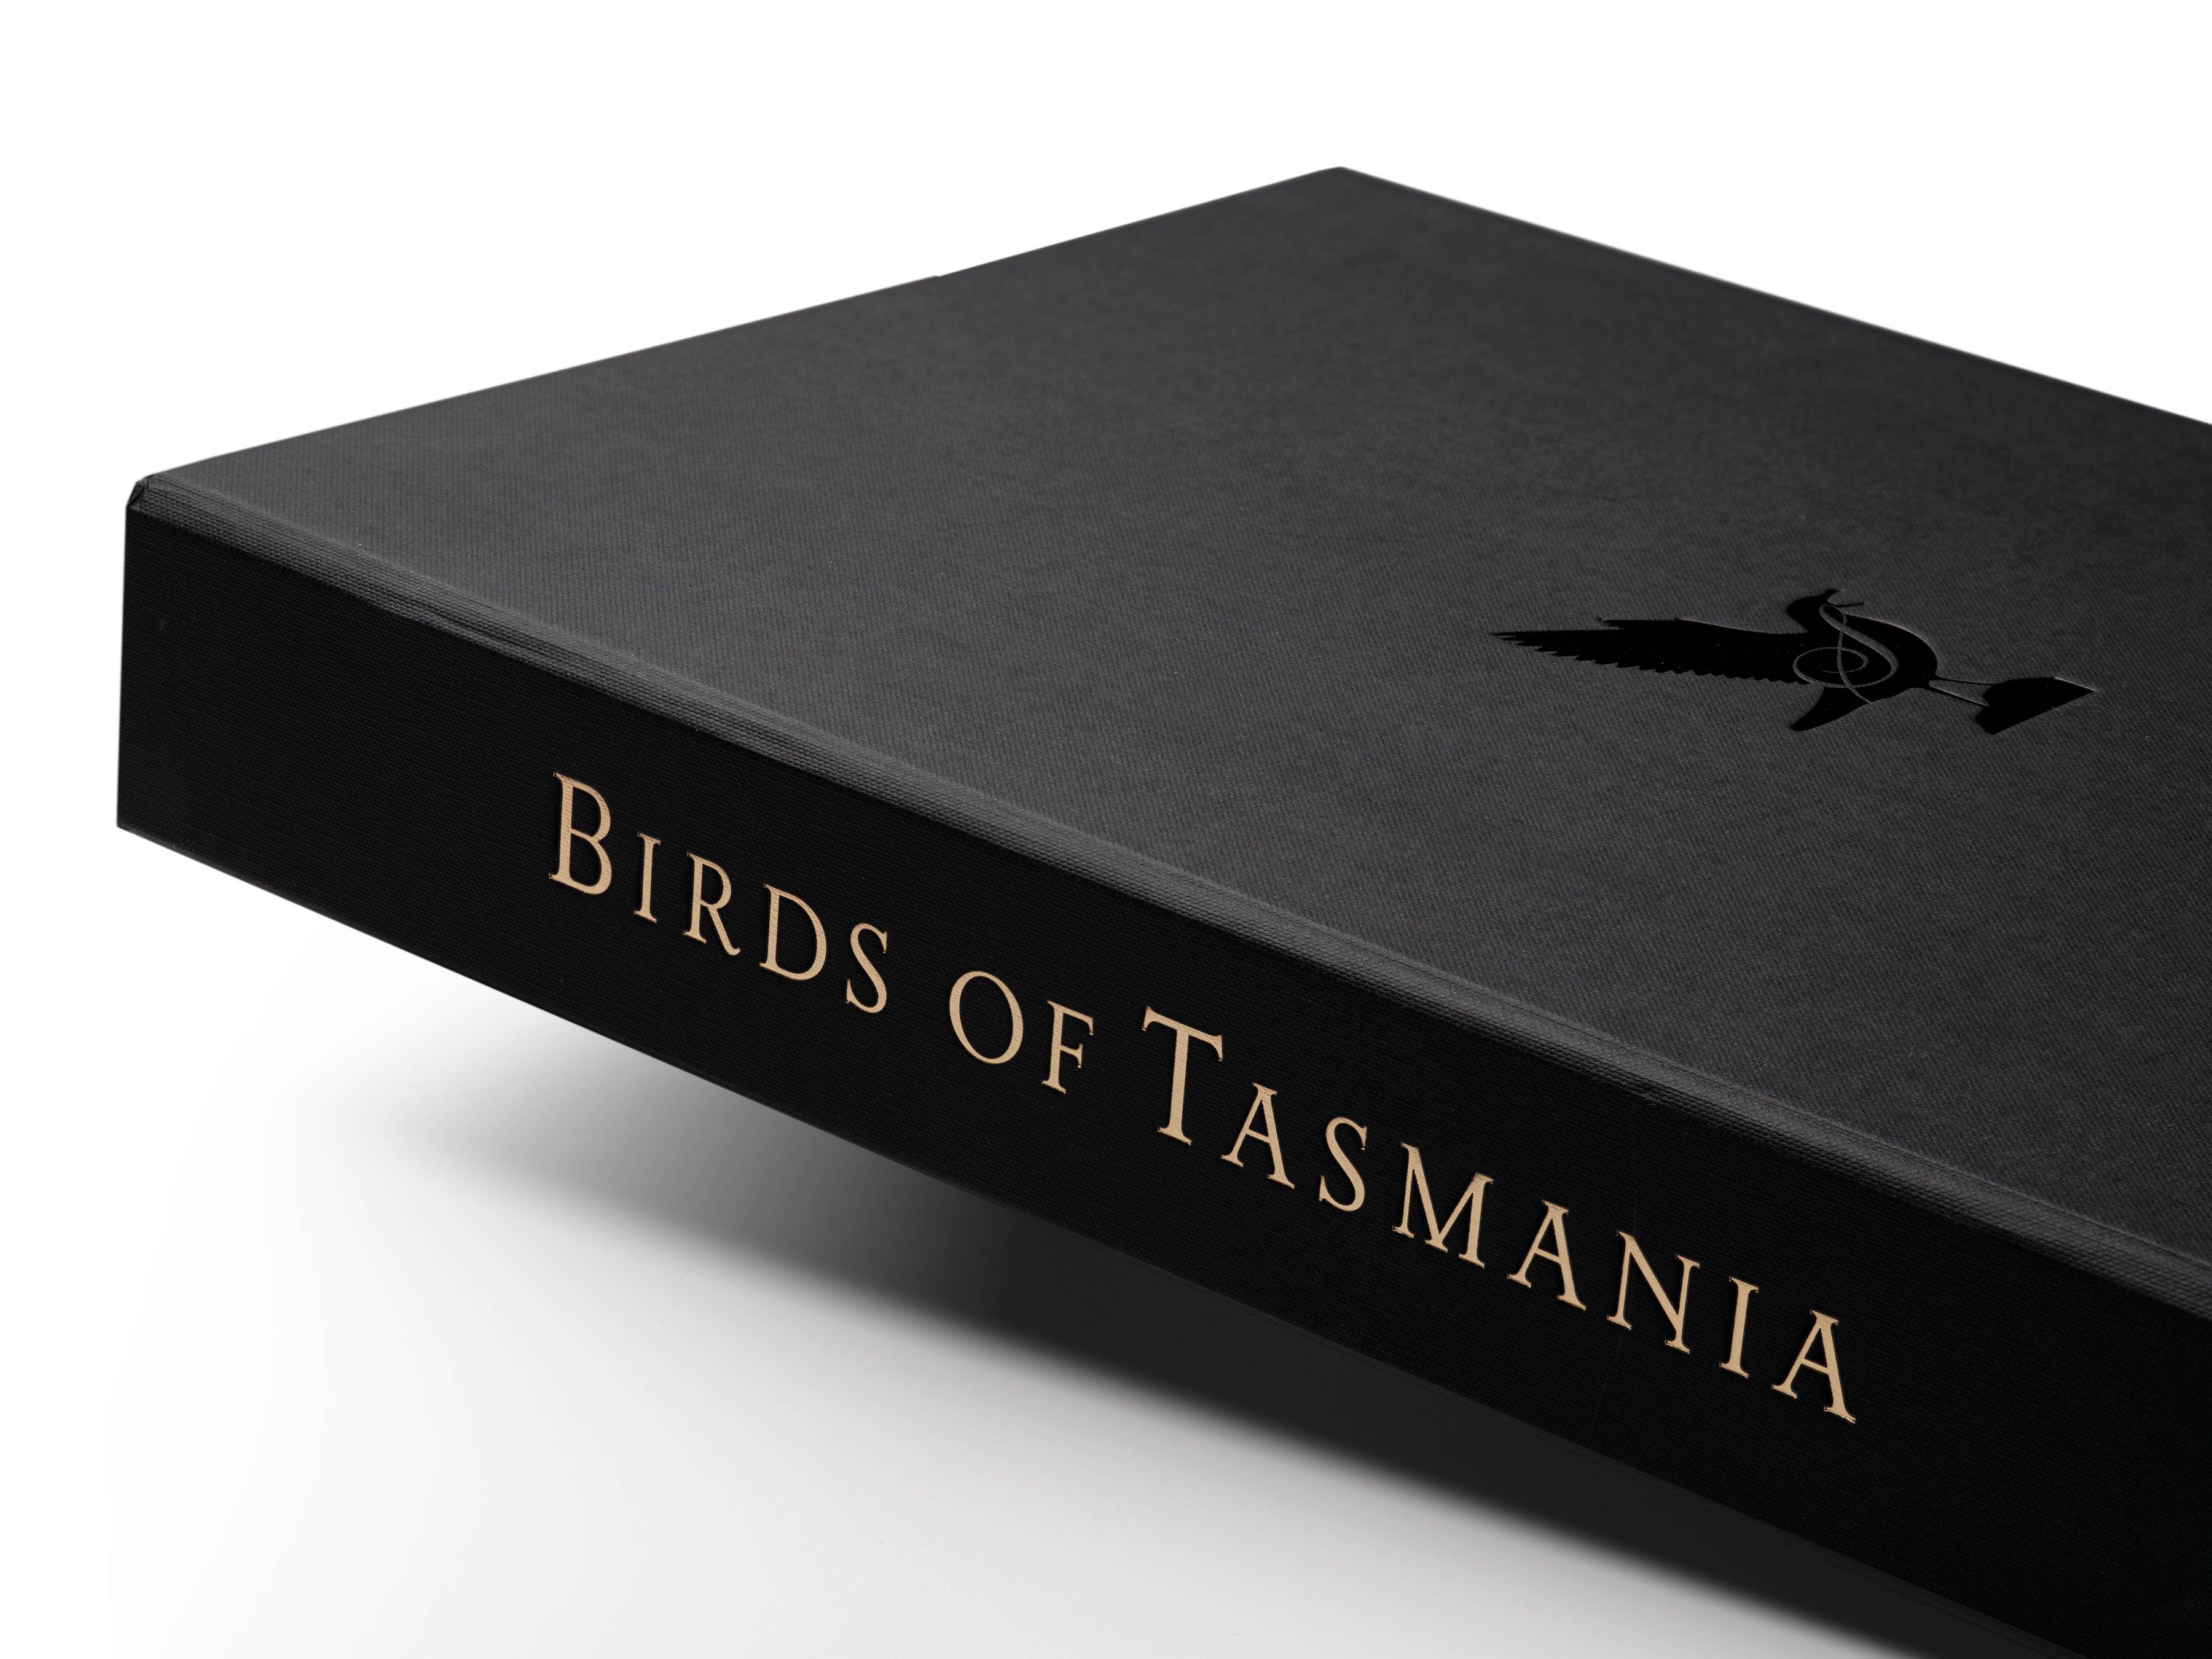 A close-up of a section of the ‘Birds of Tasmania’ by Susan Lester clamshell presentation box, showing gold foil titling and a black embossed symbol of a bird with the letter ‘S’ in a script font.